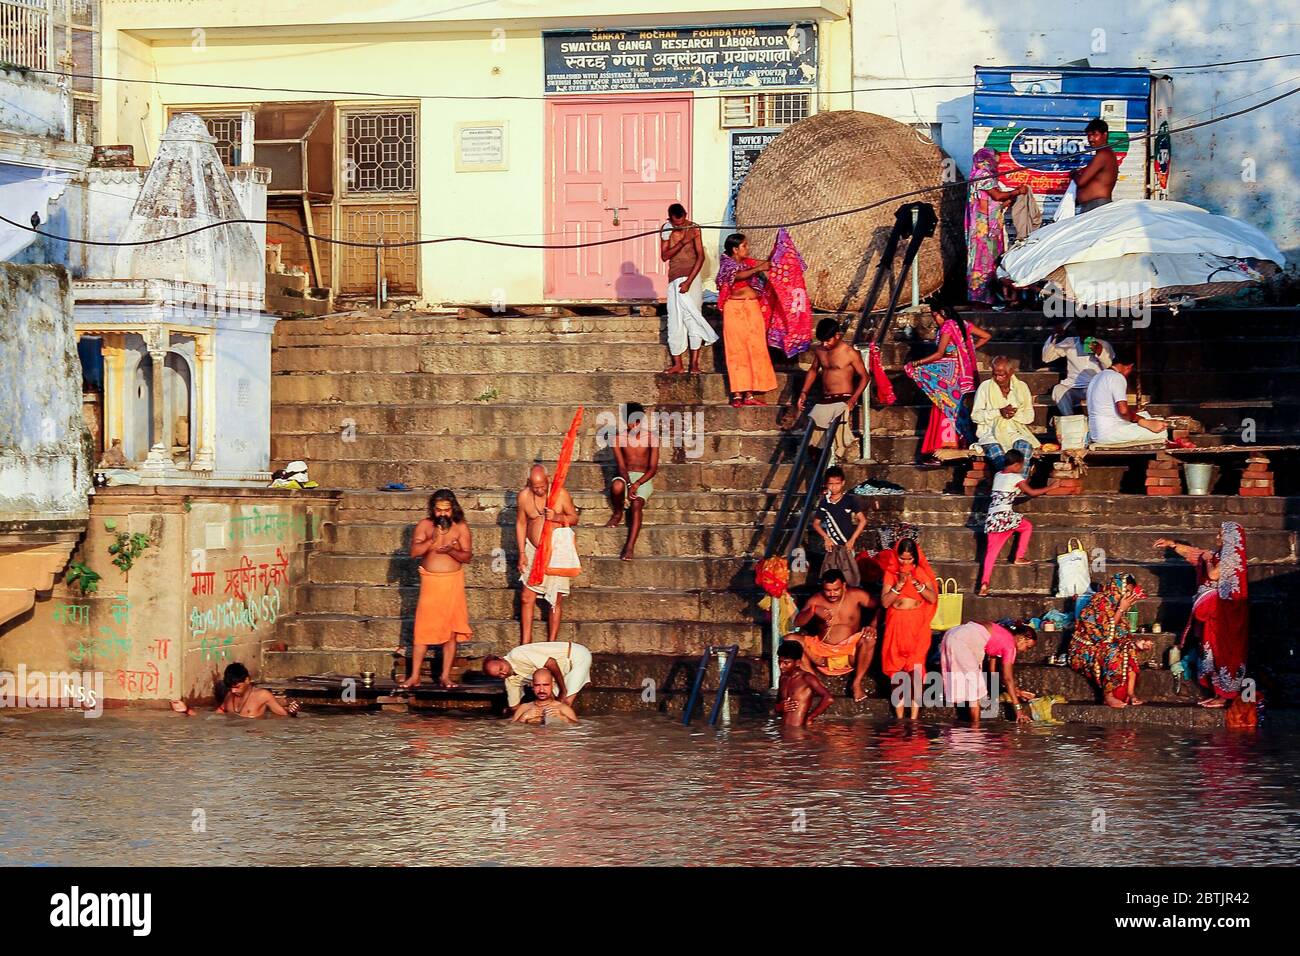 India, Varanasi - Uttar Pradesh state, 31st July 2013. After the monsoons. Numerous devotees bathe in the river and perform their daily prayers. Stock Photo